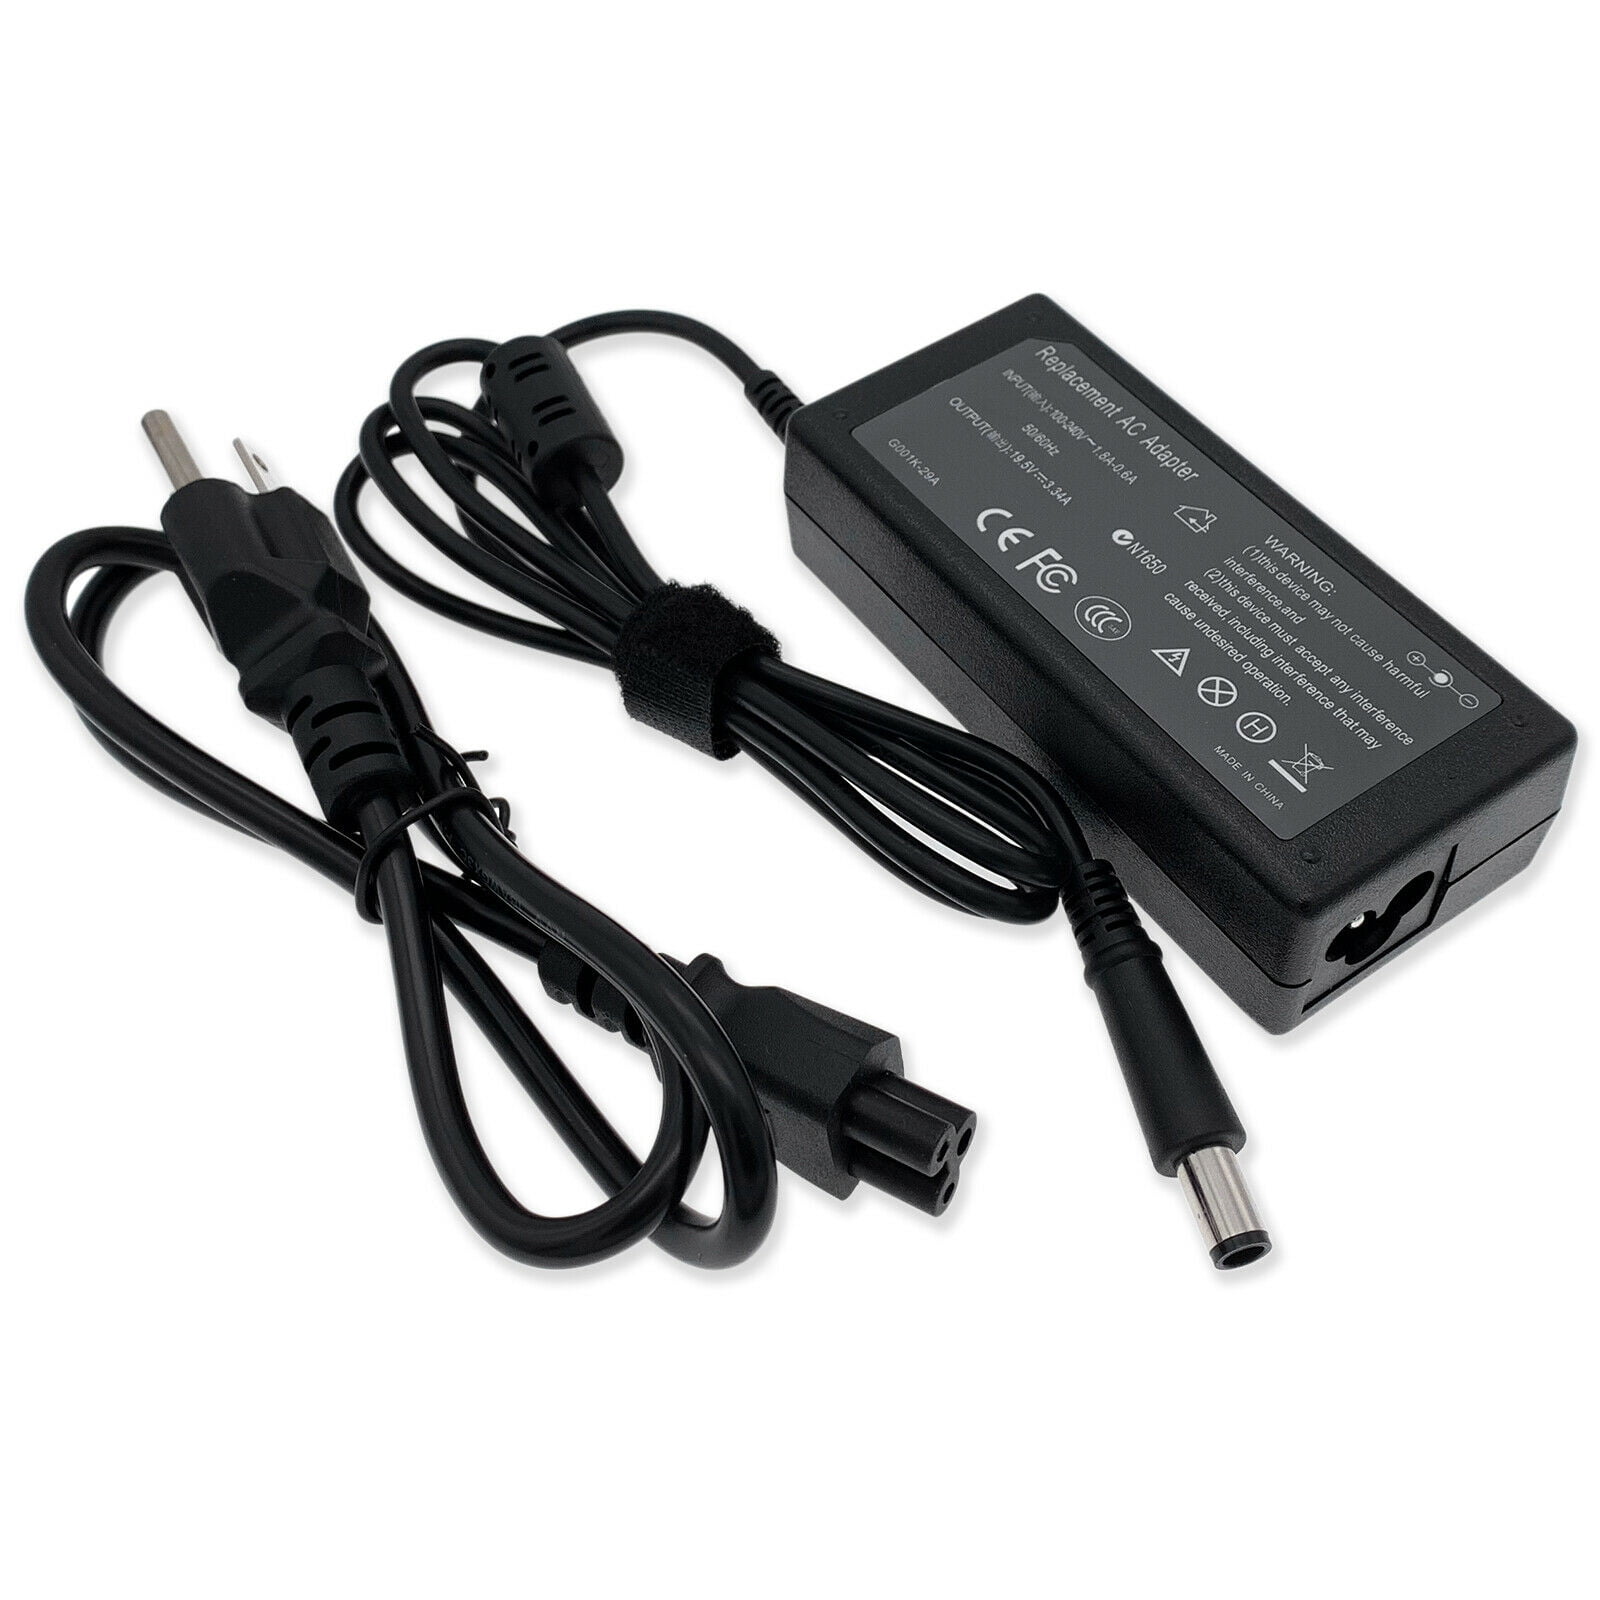 AC ADAPTER Charger Power Supply Cord for DELL PRECISION M4300 M6400 M2400  M2400n 